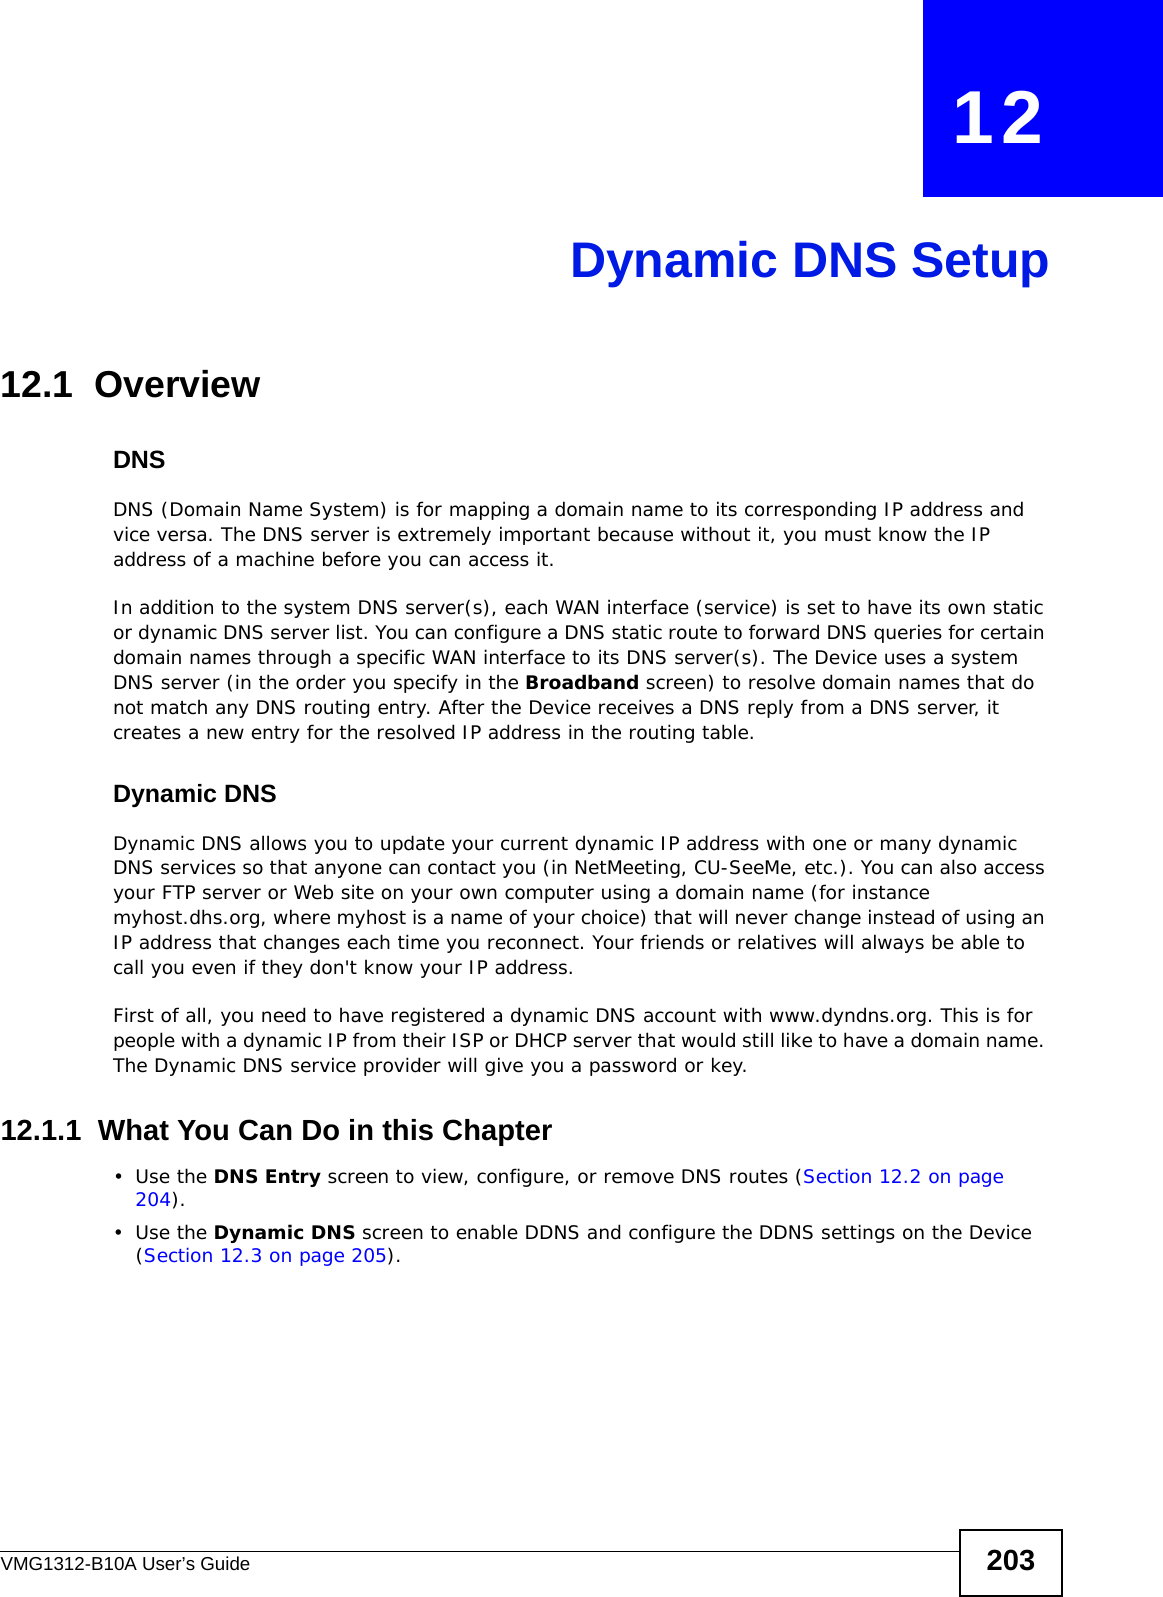 VMG1312-B10A User’s Guide 203CHAPTER   12Dynamic DNS Setup12.1  Overview DNSDNS (Domain Name System) is for mapping a domain name to its corresponding IP address and vice versa. The DNS server is extremely important because without it, you must know the IP address of a machine before you can access it. In addition to the system DNS server(s), each WAN interface (service) is set to have its own static or dynamic DNS server list. You can configure a DNS static route to forward DNS queries for certain domain names through a specific WAN interface to its DNS server(s). The Device uses a system DNS server (in the order you specify in the Broadband screen) to resolve domain names that do not match any DNS routing entry. After the Device receives a DNS reply from a DNS server, it creates a new entry for the resolved IP address in the routing table.Dynamic DNSDynamic DNS allows you to update your current dynamic IP address with one or many dynamic DNS services so that anyone can contact you (in NetMeeting, CU-SeeMe, etc.). You can also access your FTP server or Web site on your own computer using a domain name (for instance myhost.dhs.org, where myhost is a name of your choice) that will never change instead of using an IP address that changes each time you reconnect. Your friends or relatives will always be able to call you even if they don&apos;t know your IP address.First of all, you need to have registered a dynamic DNS account with www.dyndns.org. This is for people with a dynamic IP from their ISP or DHCP server that would still like to have a domain name. The Dynamic DNS service provider will give you a password or key. 12.1.1  What You Can Do in this Chapter•Use the DNS Entry screen to view, configure, or remove DNS routes (Section 12.2 on page 204).•Use the Dynamic DNS screen to enable DDNS and configure the DDNS settings on the Device (Section 12.3 on page 205).